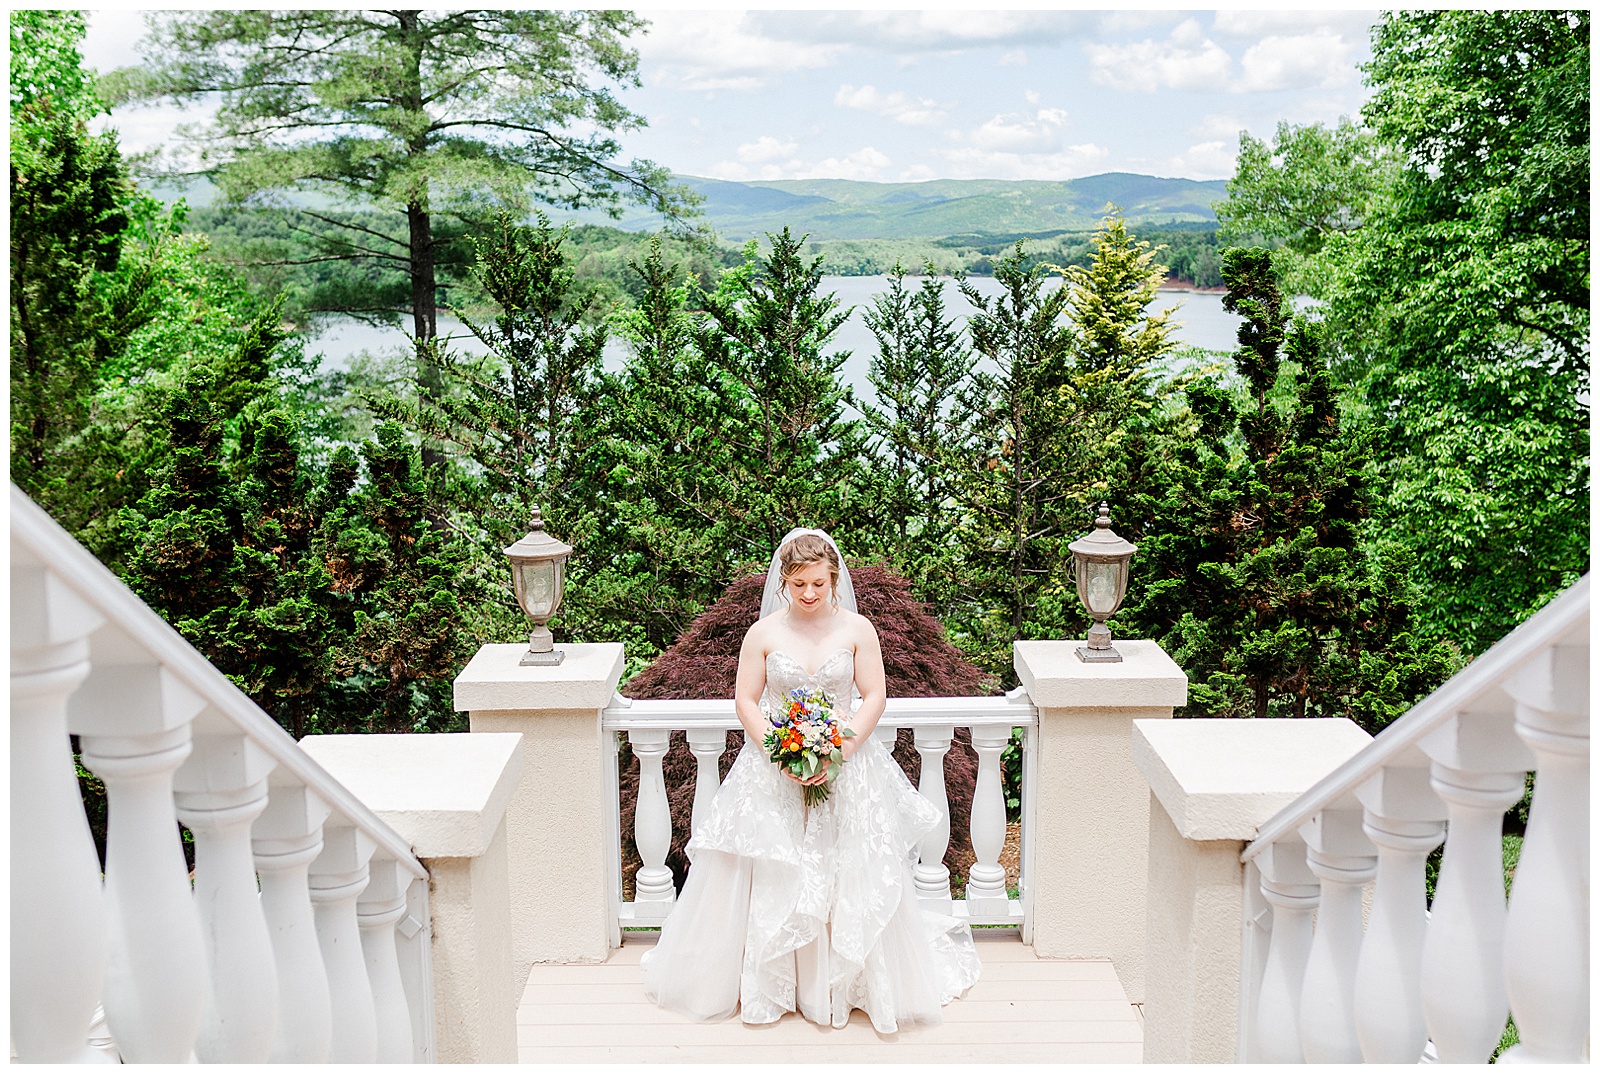 gorgeous scenic lakehouse white mansion location 👰 Bride: lace wedding dress + veil 💐 Colorful orange and blue bouquet 📸 Outdoorsy Lake and Mountain Bridal Session with Julia | Kevyn Dixon Photography